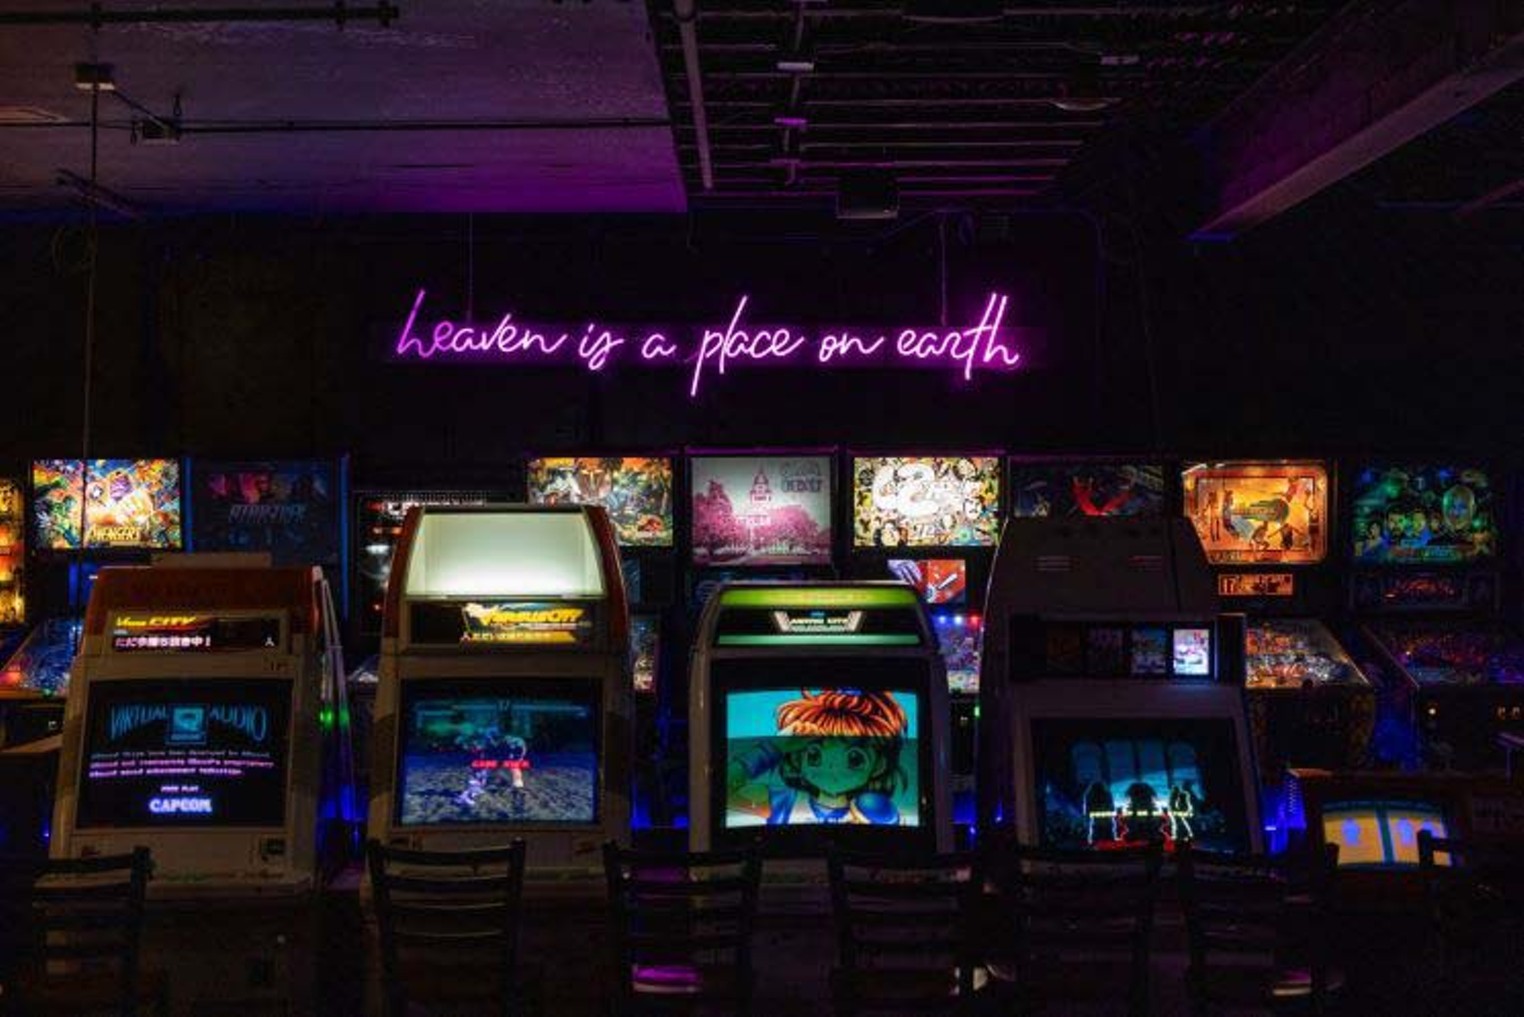 Free Play Arcade Is Home Again With a Massive Space in Denton